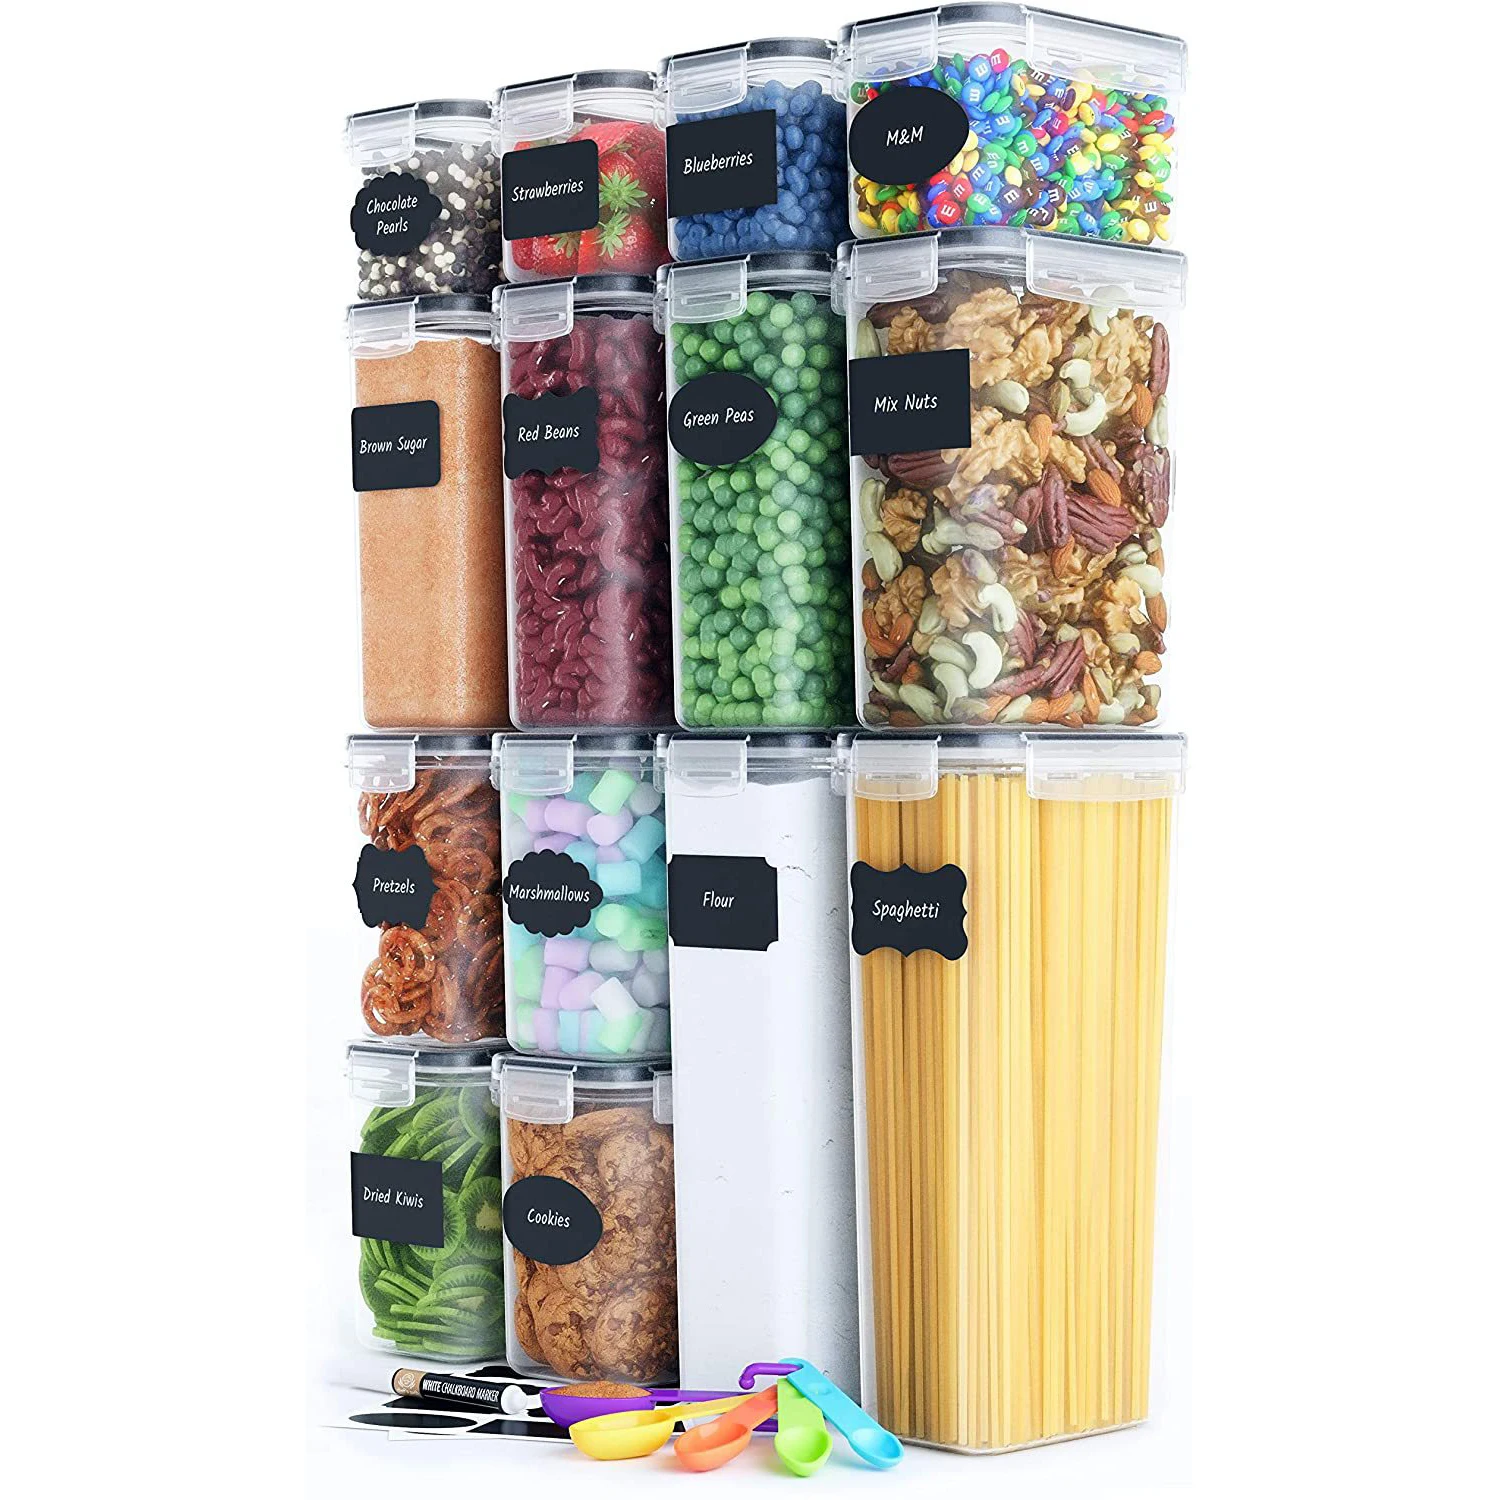 

14 Pack Plastic Food Cereal Dry Storage & Container Set with Free Chalkboard Label, Grey/blue/beige/black